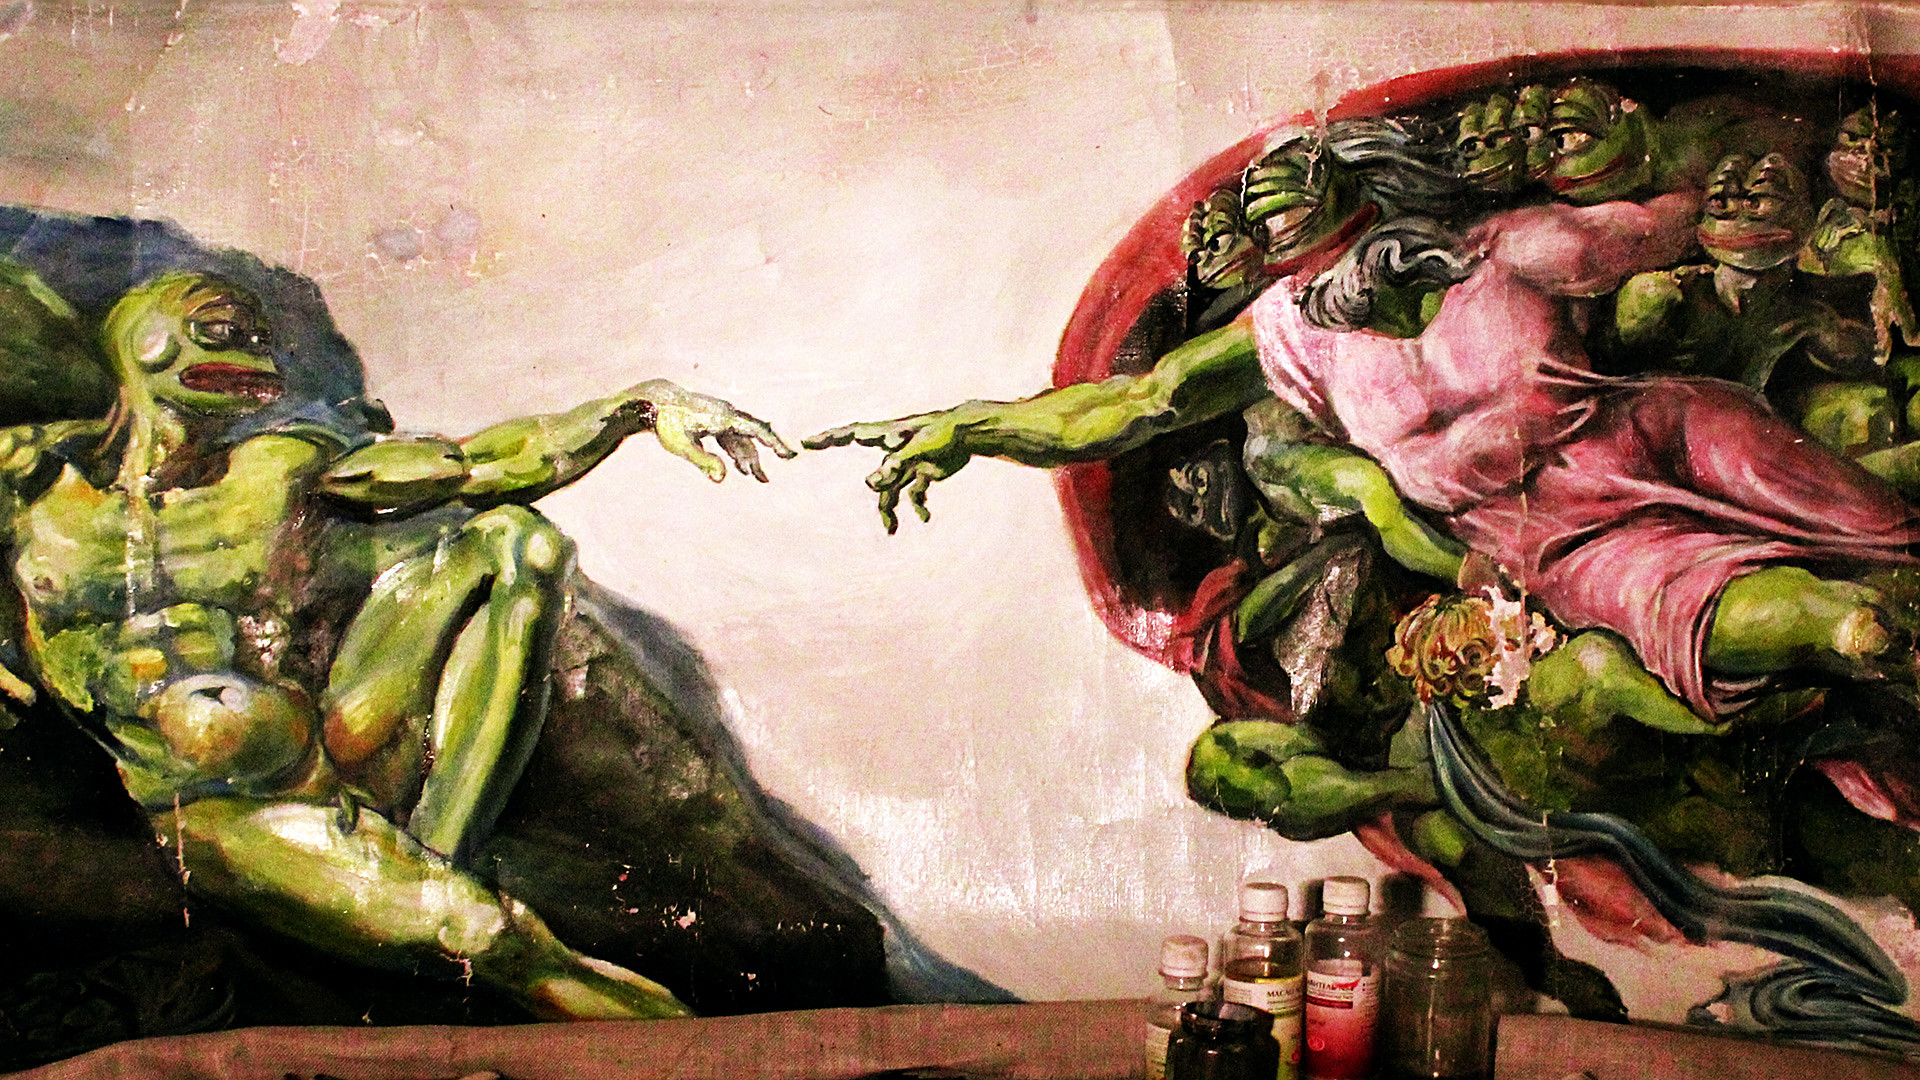 The Creation Of Pepe By Olga Vishnevsky - Pepe The Frog Art , HD Wallpaper & Backgrounds